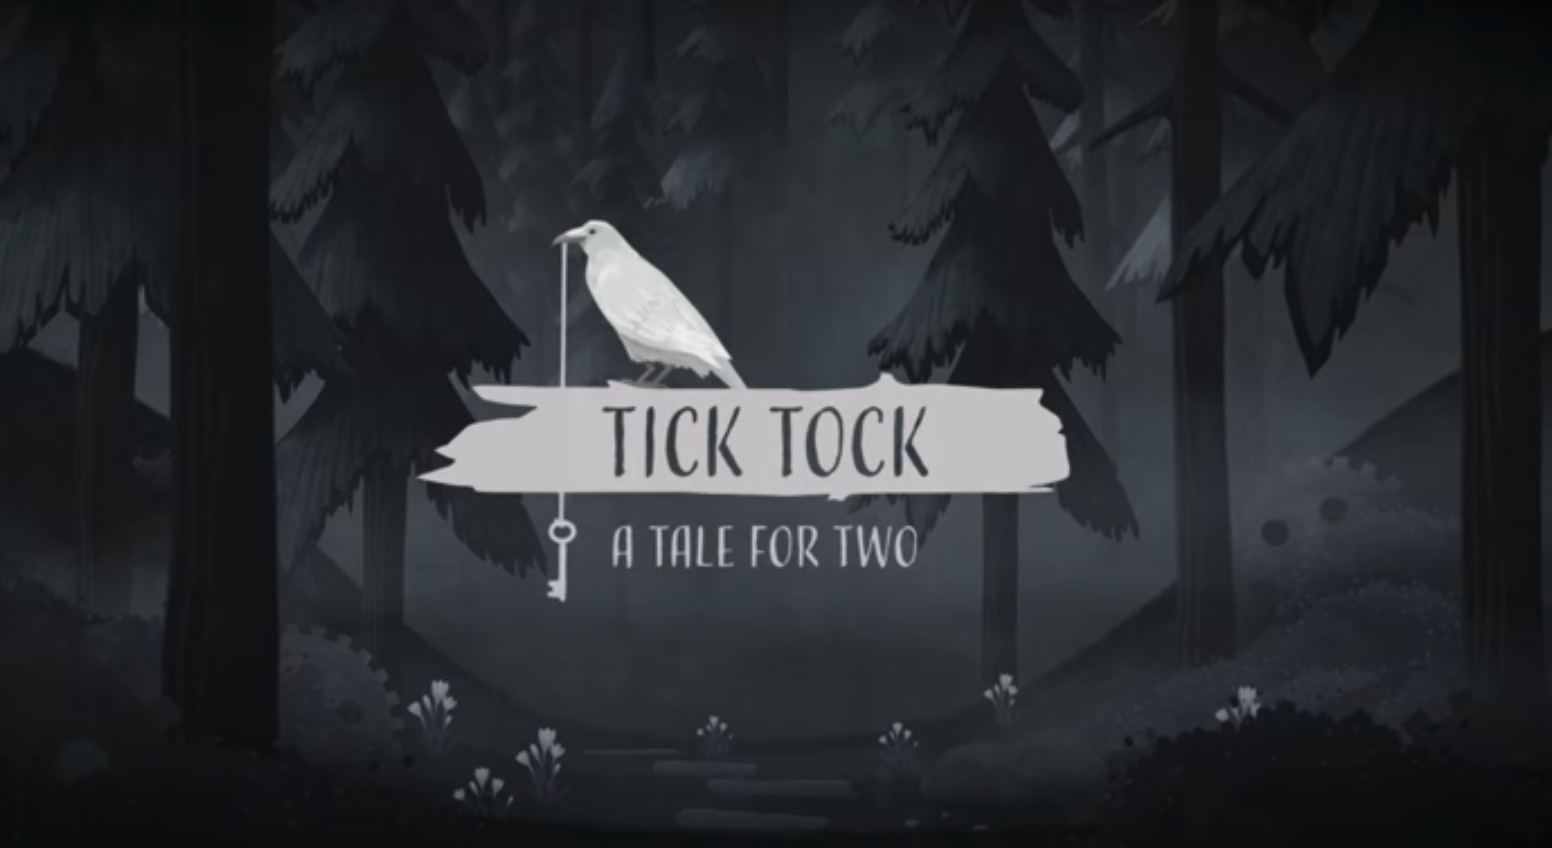 Lettering "Tick Tock: A Tale for Two" in front of a dark forest. On the lettering sits a raven with a key in its beak.